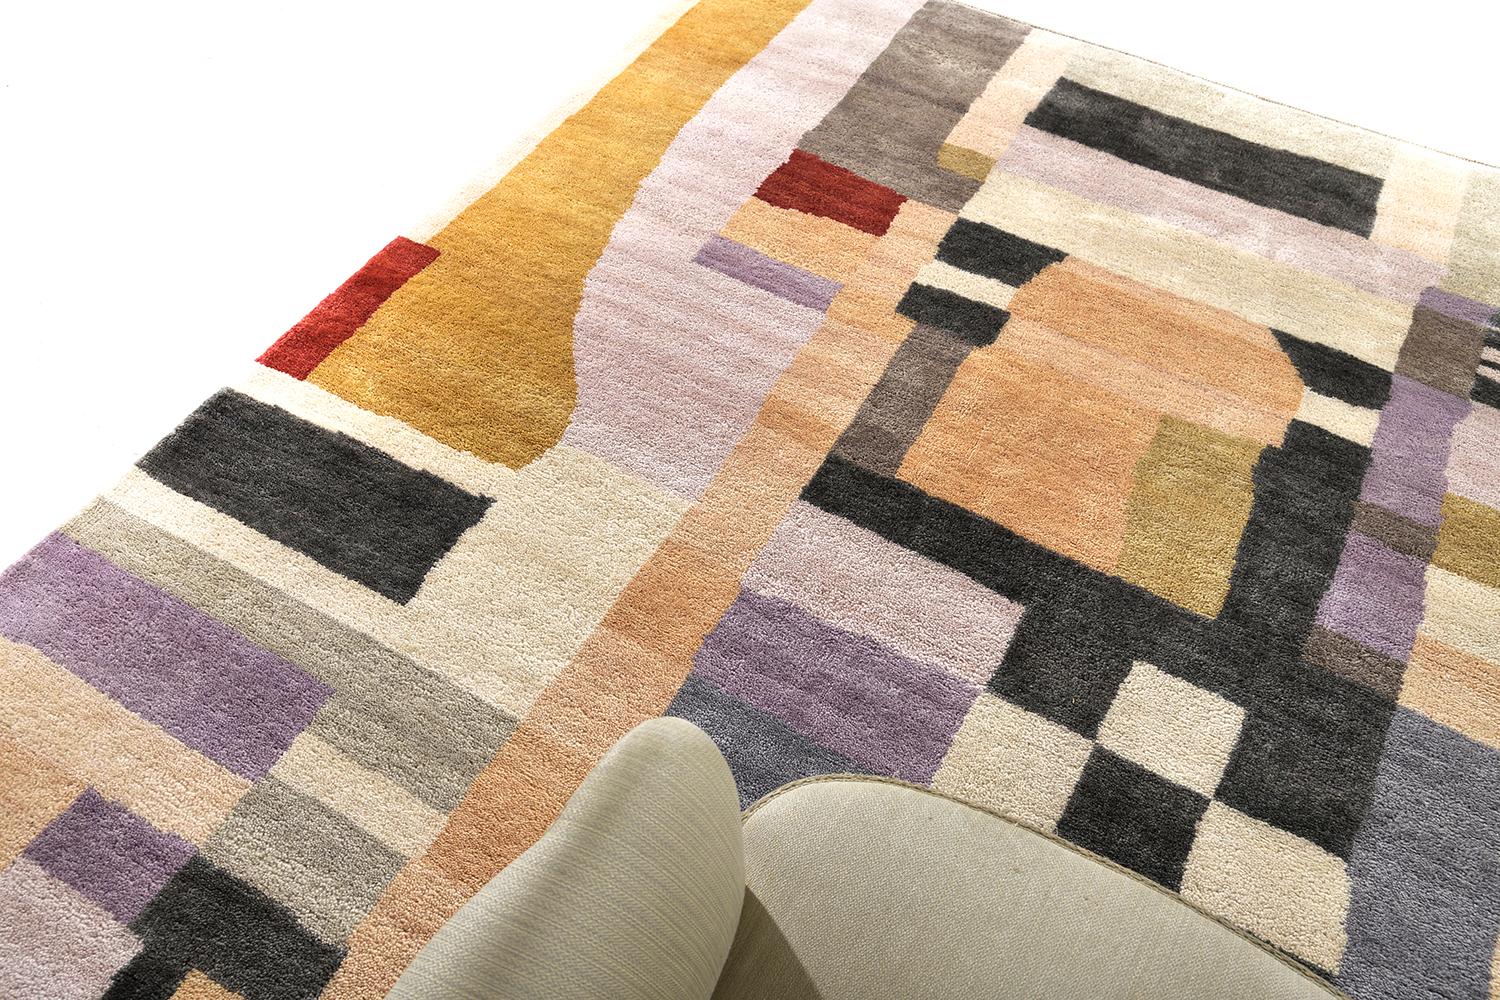 'Etude' is a handwoven pure wool piece designed by leading textile designer Liesel Plambeck. It was inspired by the early 1920 European Bauhaus design movement with the incorporation of geometric shapes vivid primary colorations.


Rug Number